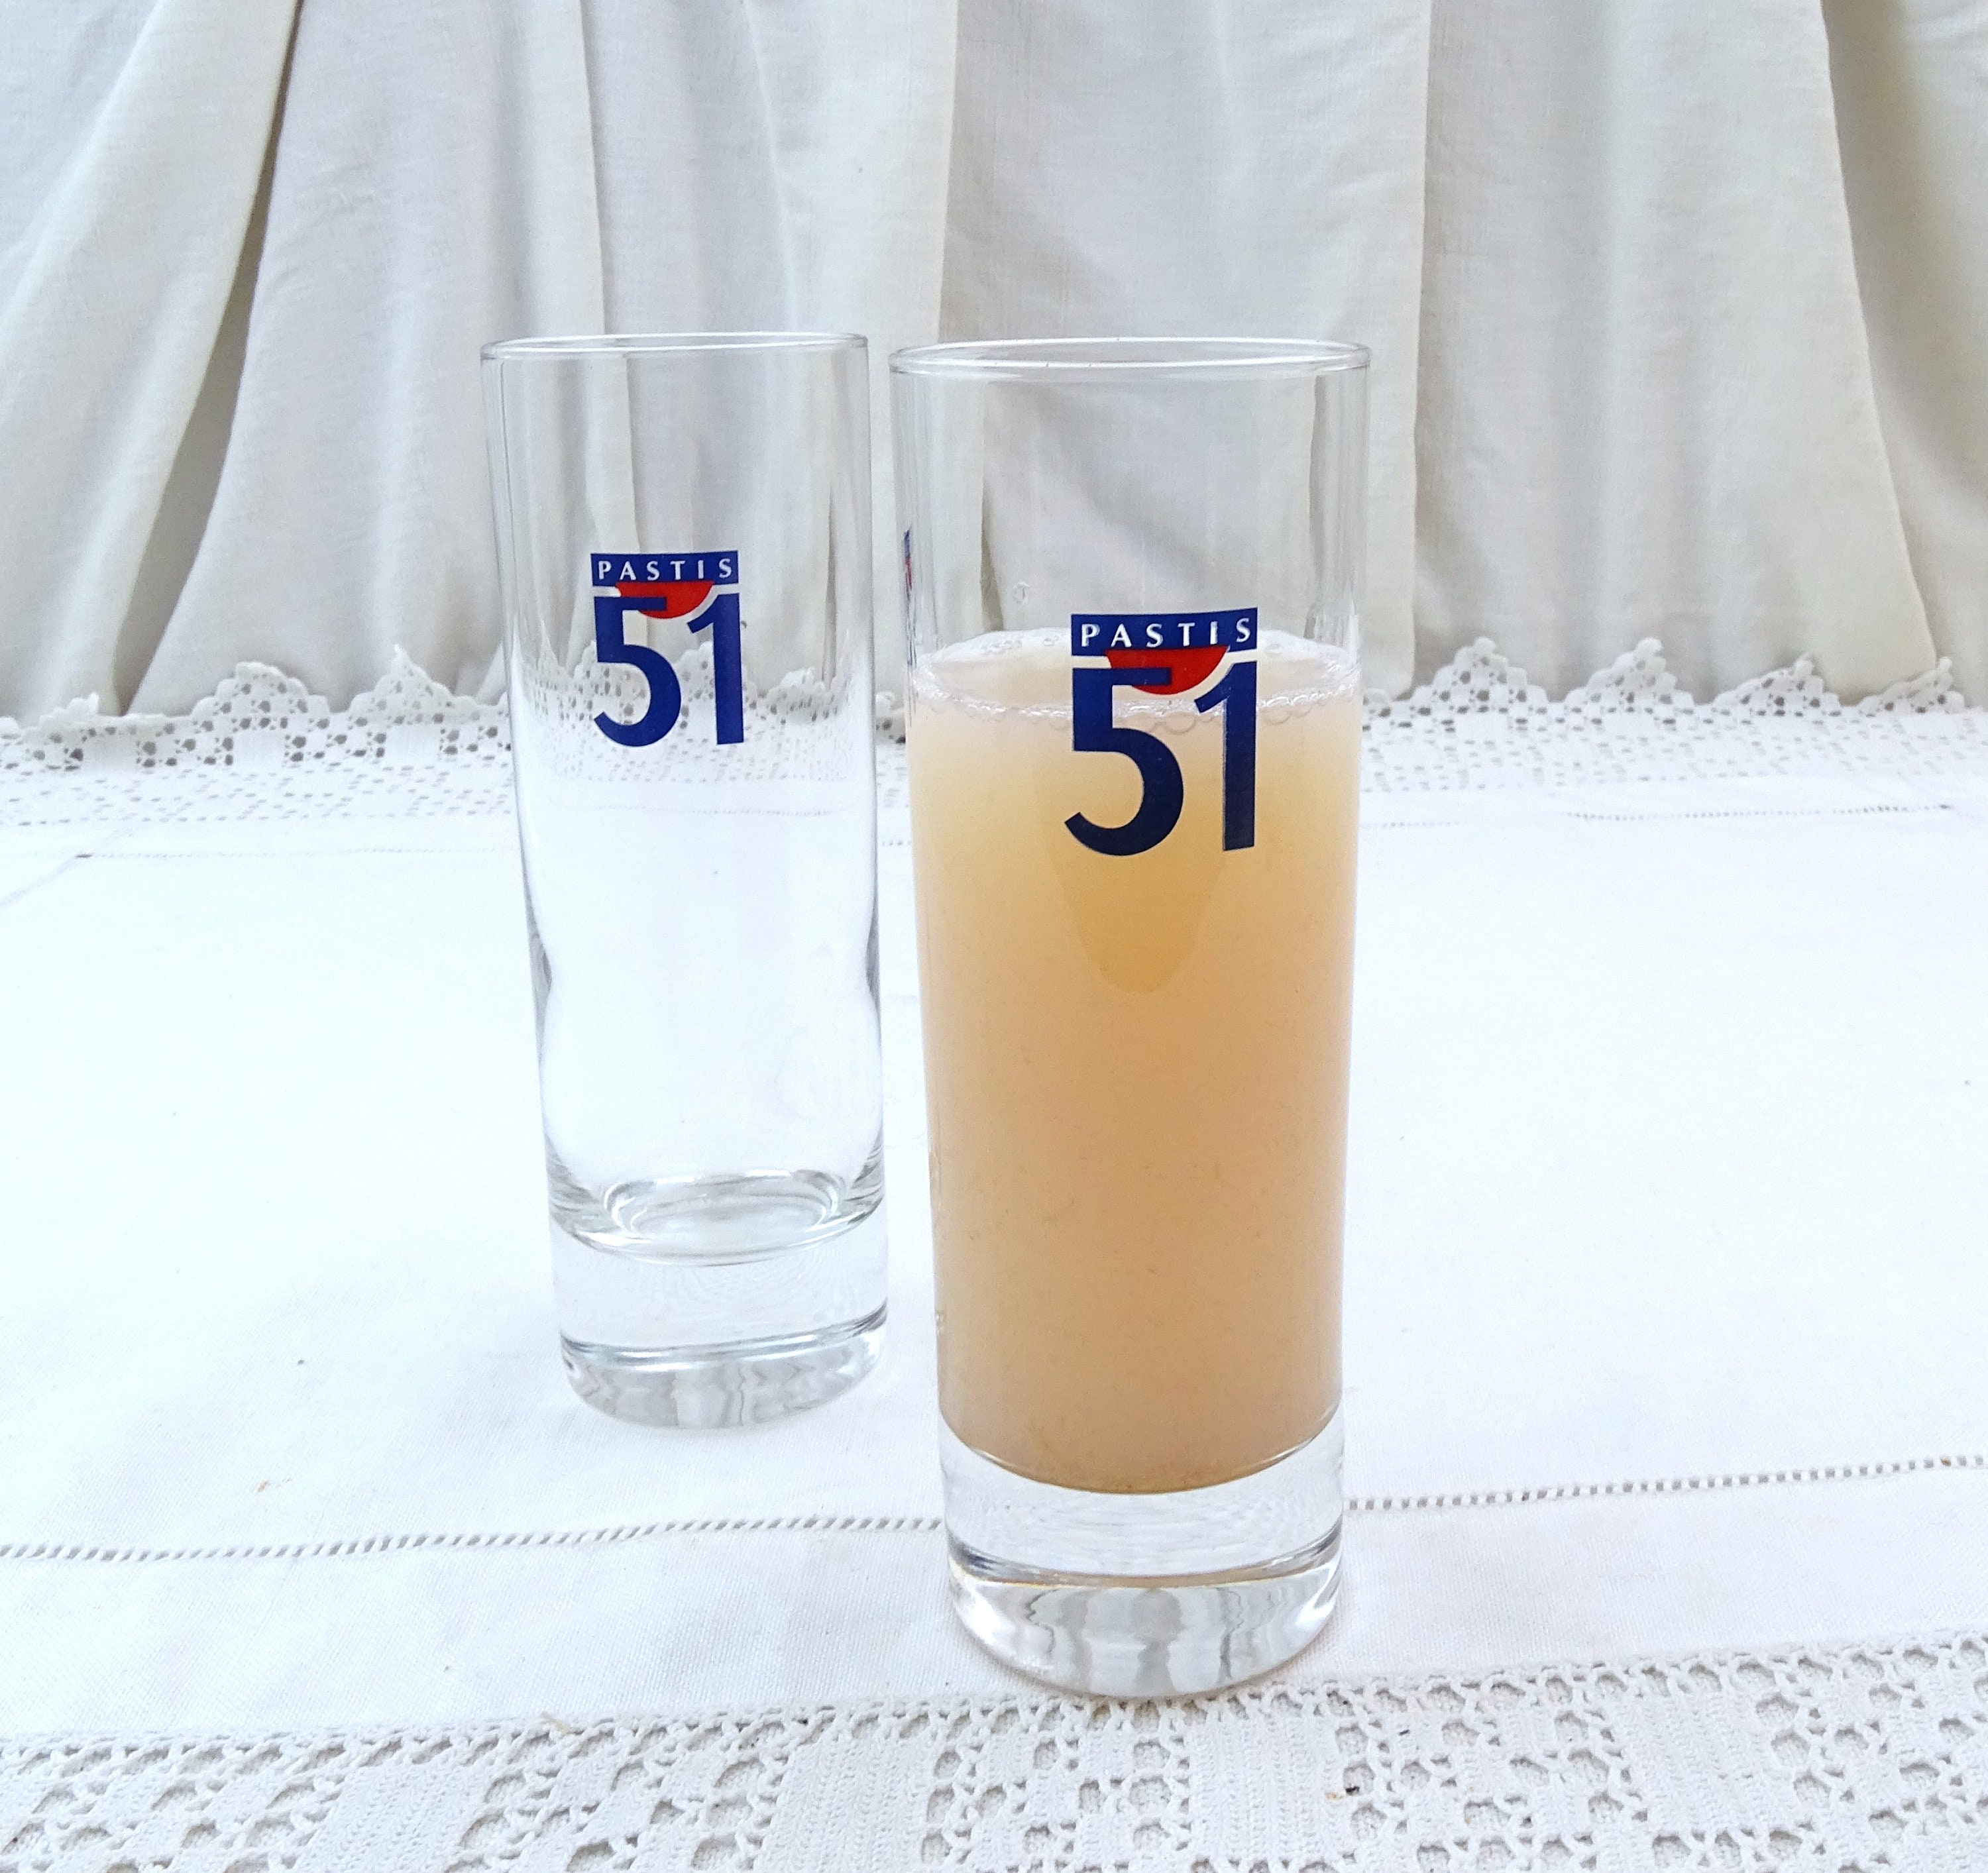 2 French Vintage Tall Thin Pastis 51 Glasses, Pair French Aperitif  Tumblers, Retro Pernod Ricard Cote D'Azur Barware South of France